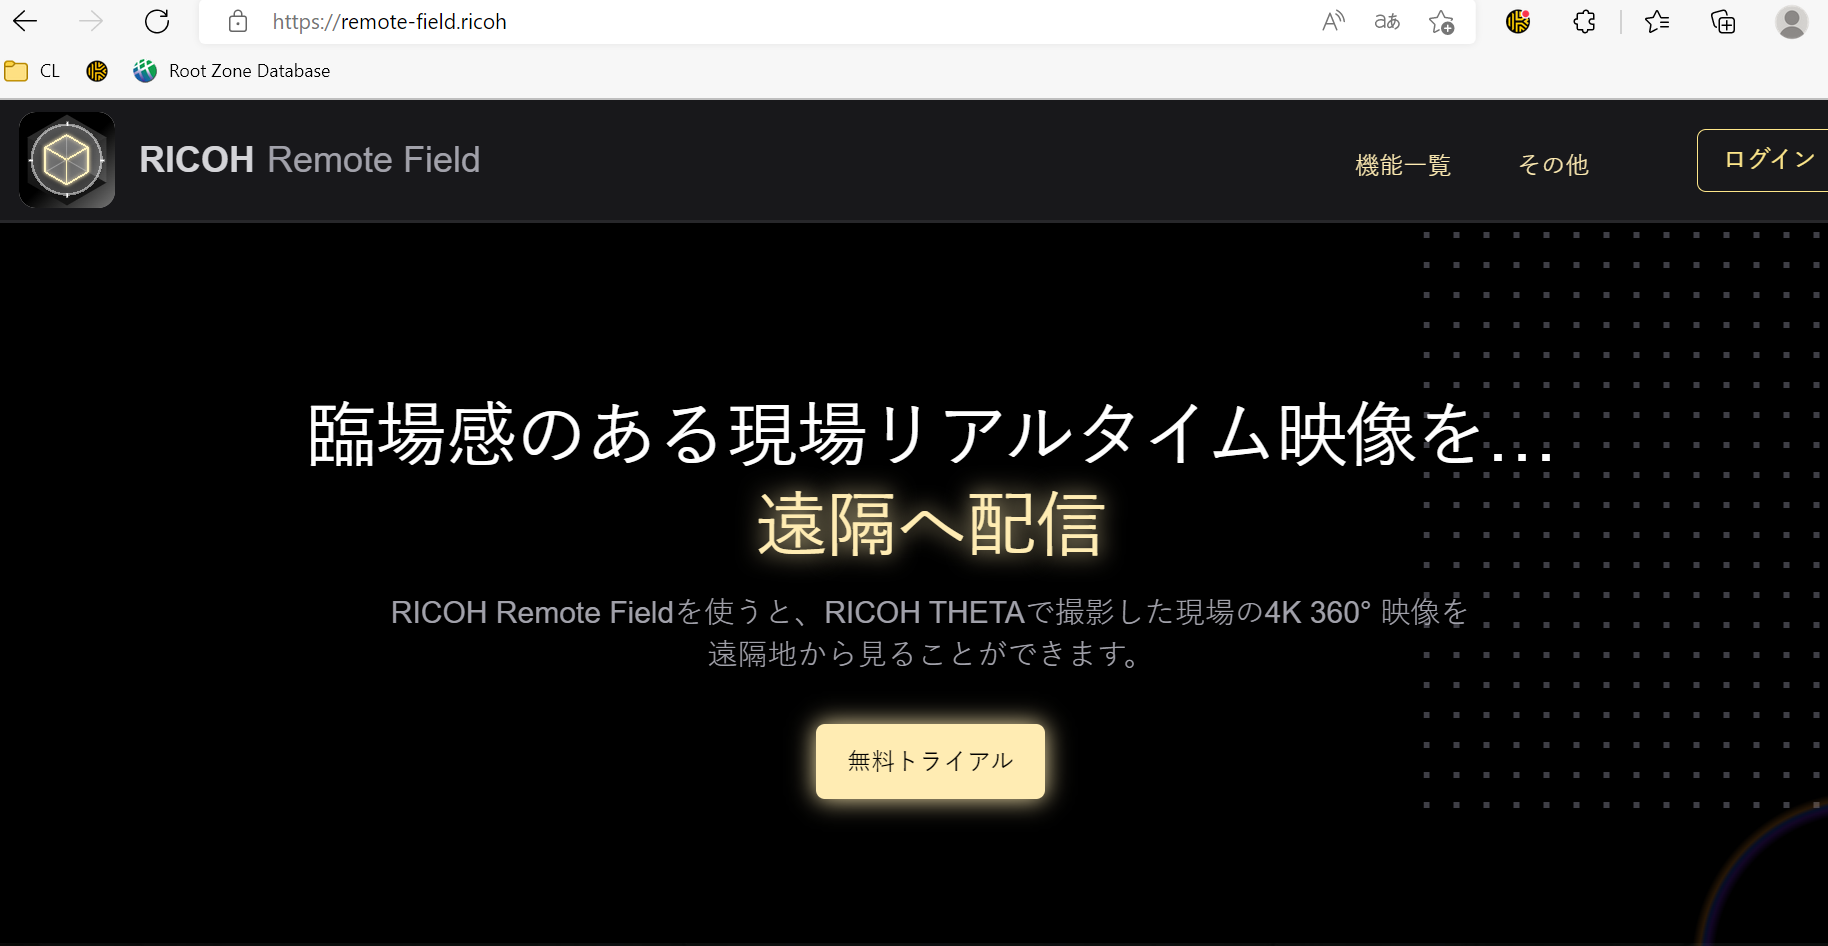 website for remote-field.ricoh